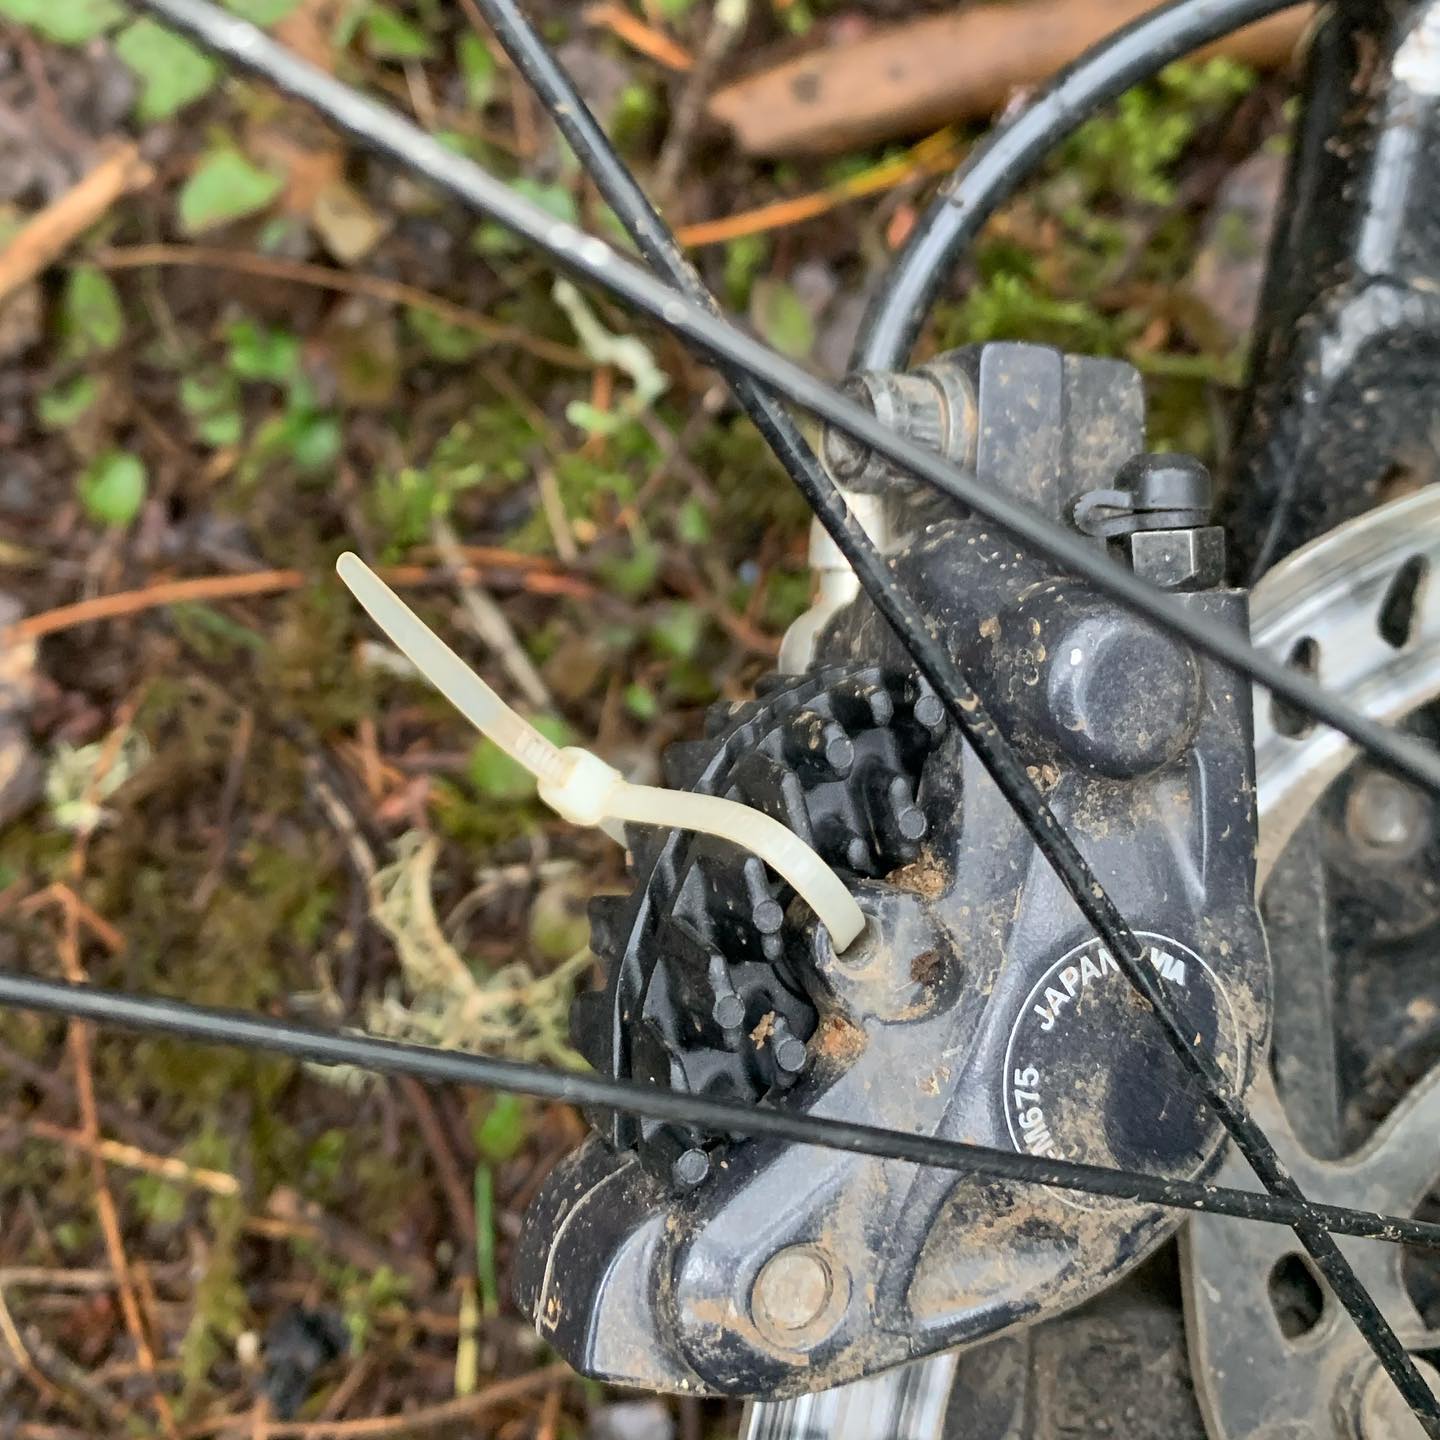 Sigh. My bike hates me. Put on new brake pads yesterday and forgot to properly bend the cotter pin in place. Thankfully I noticed this before I lost a brake pad and did any damage. #mtbvi #yyj #mountainbiking #bikesarefun #yourbikehatesyou #ziptietotherescue #bodgejob